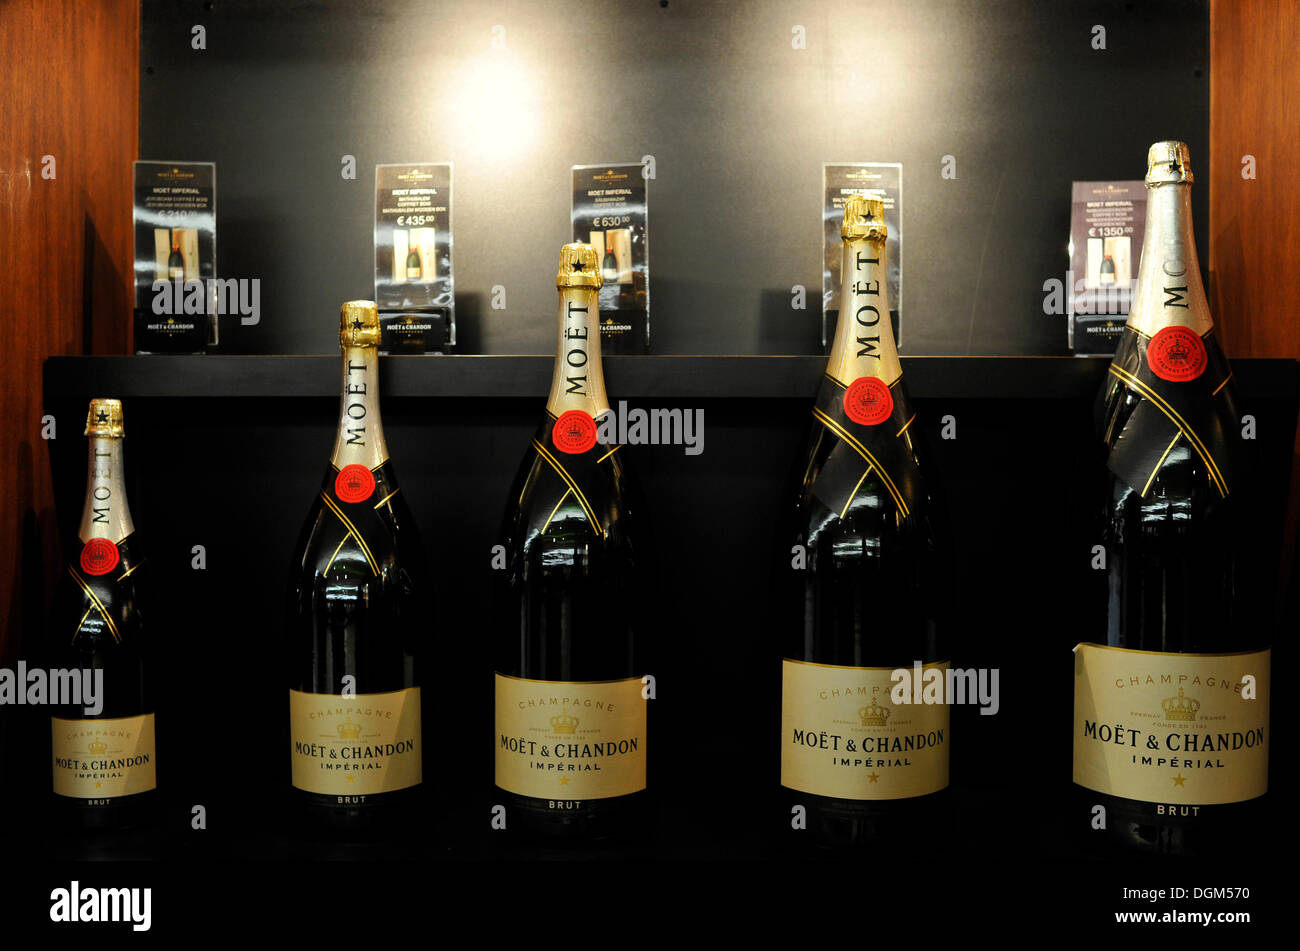 Champagne bottles in various sizes, Imperial, Moet et Chandon winery Stock Photo, Royalty Free ...